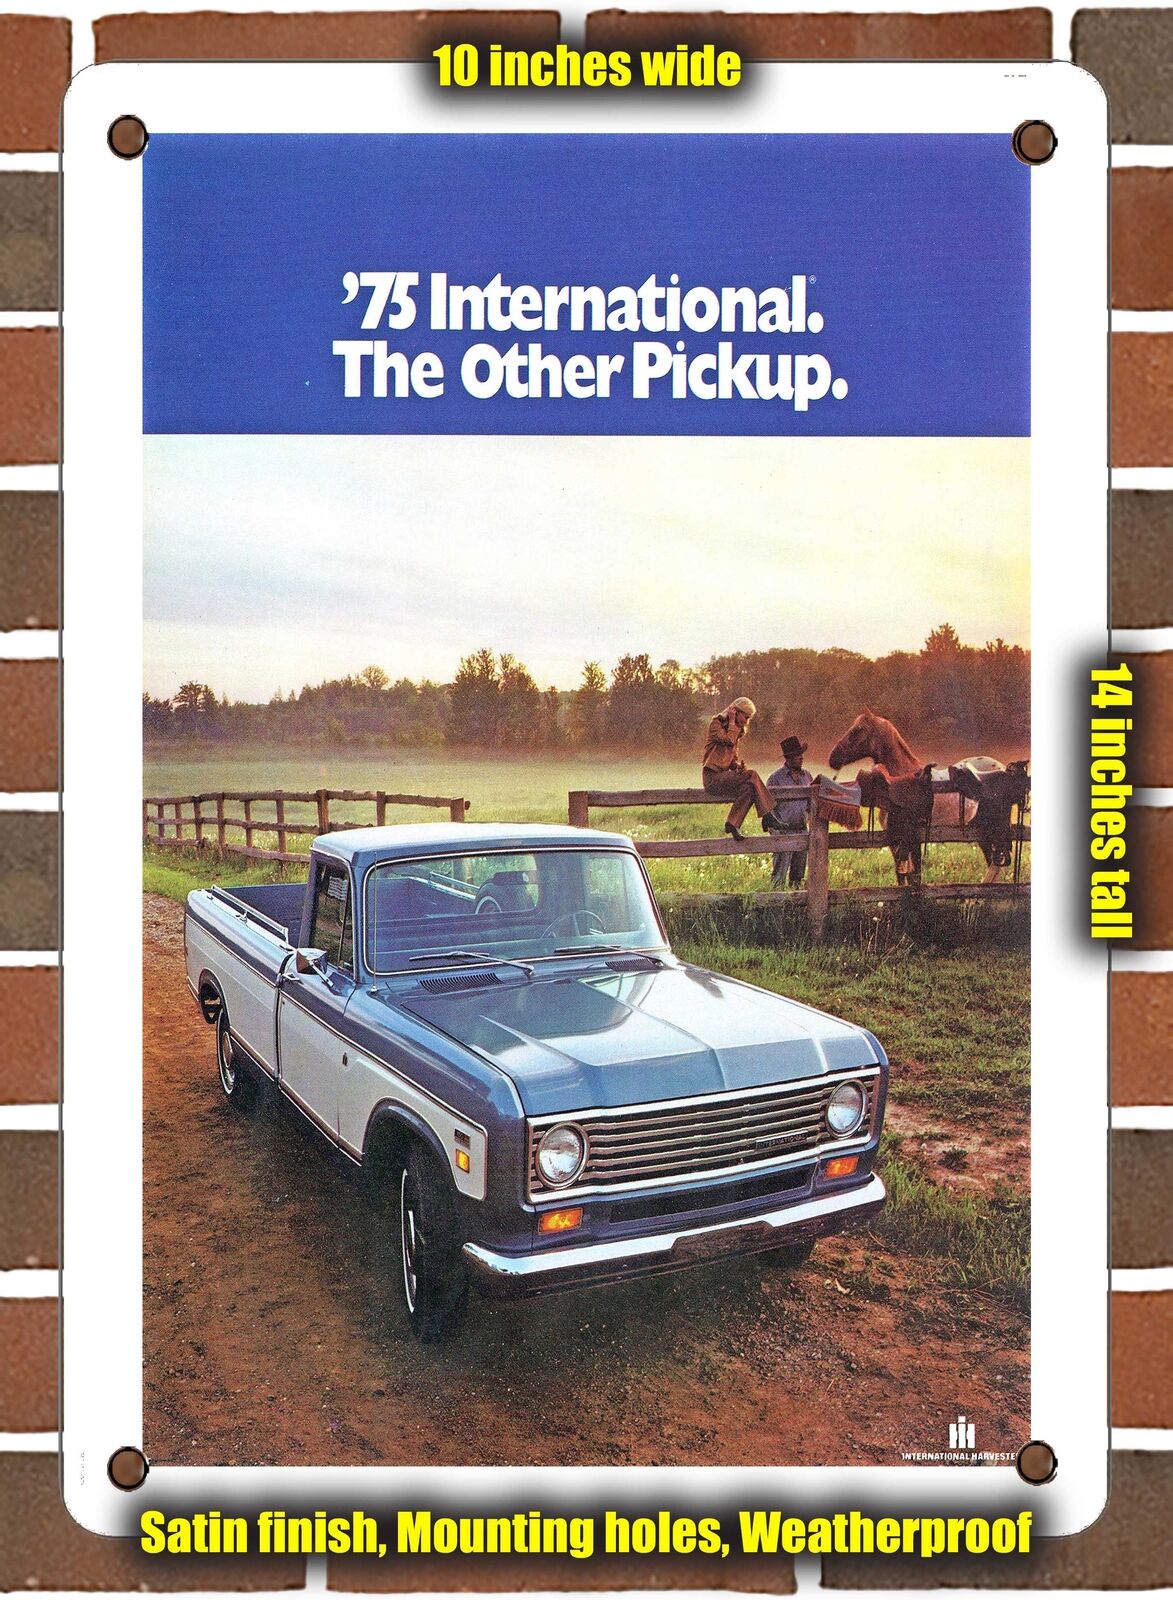 METAL SIGN - 1975 International Pickup the Other Pickup - 10x14 Inches